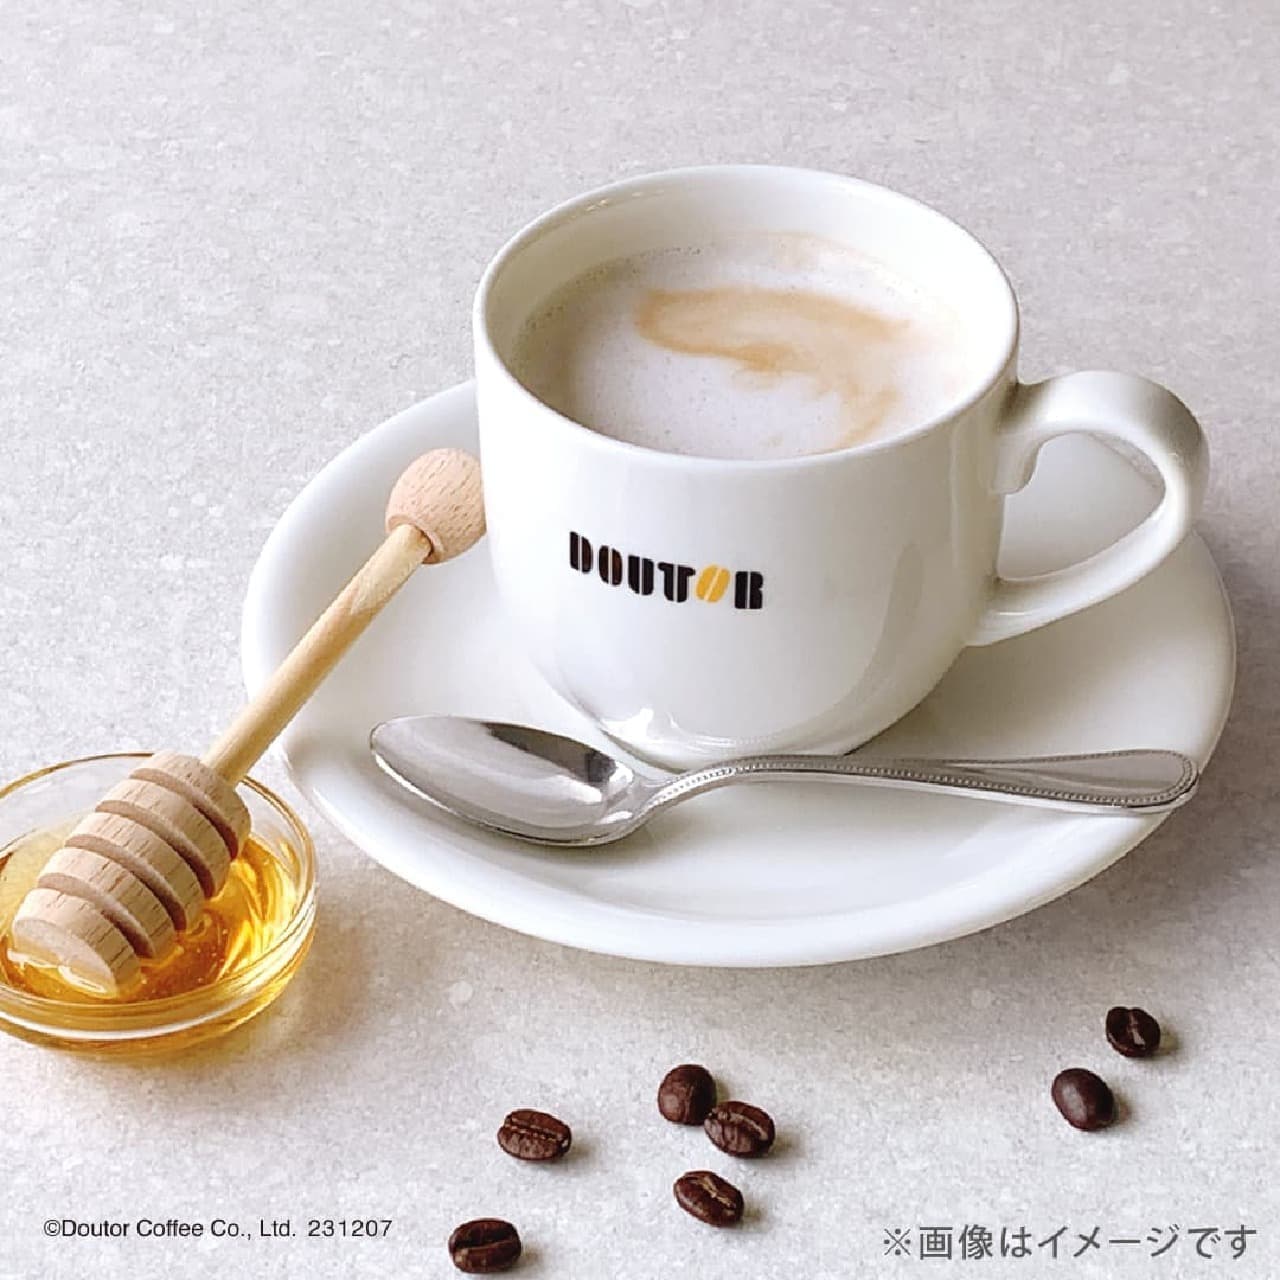 Doutor mail order limited “Honey Cafe Ole Fragrant Hand Cream”